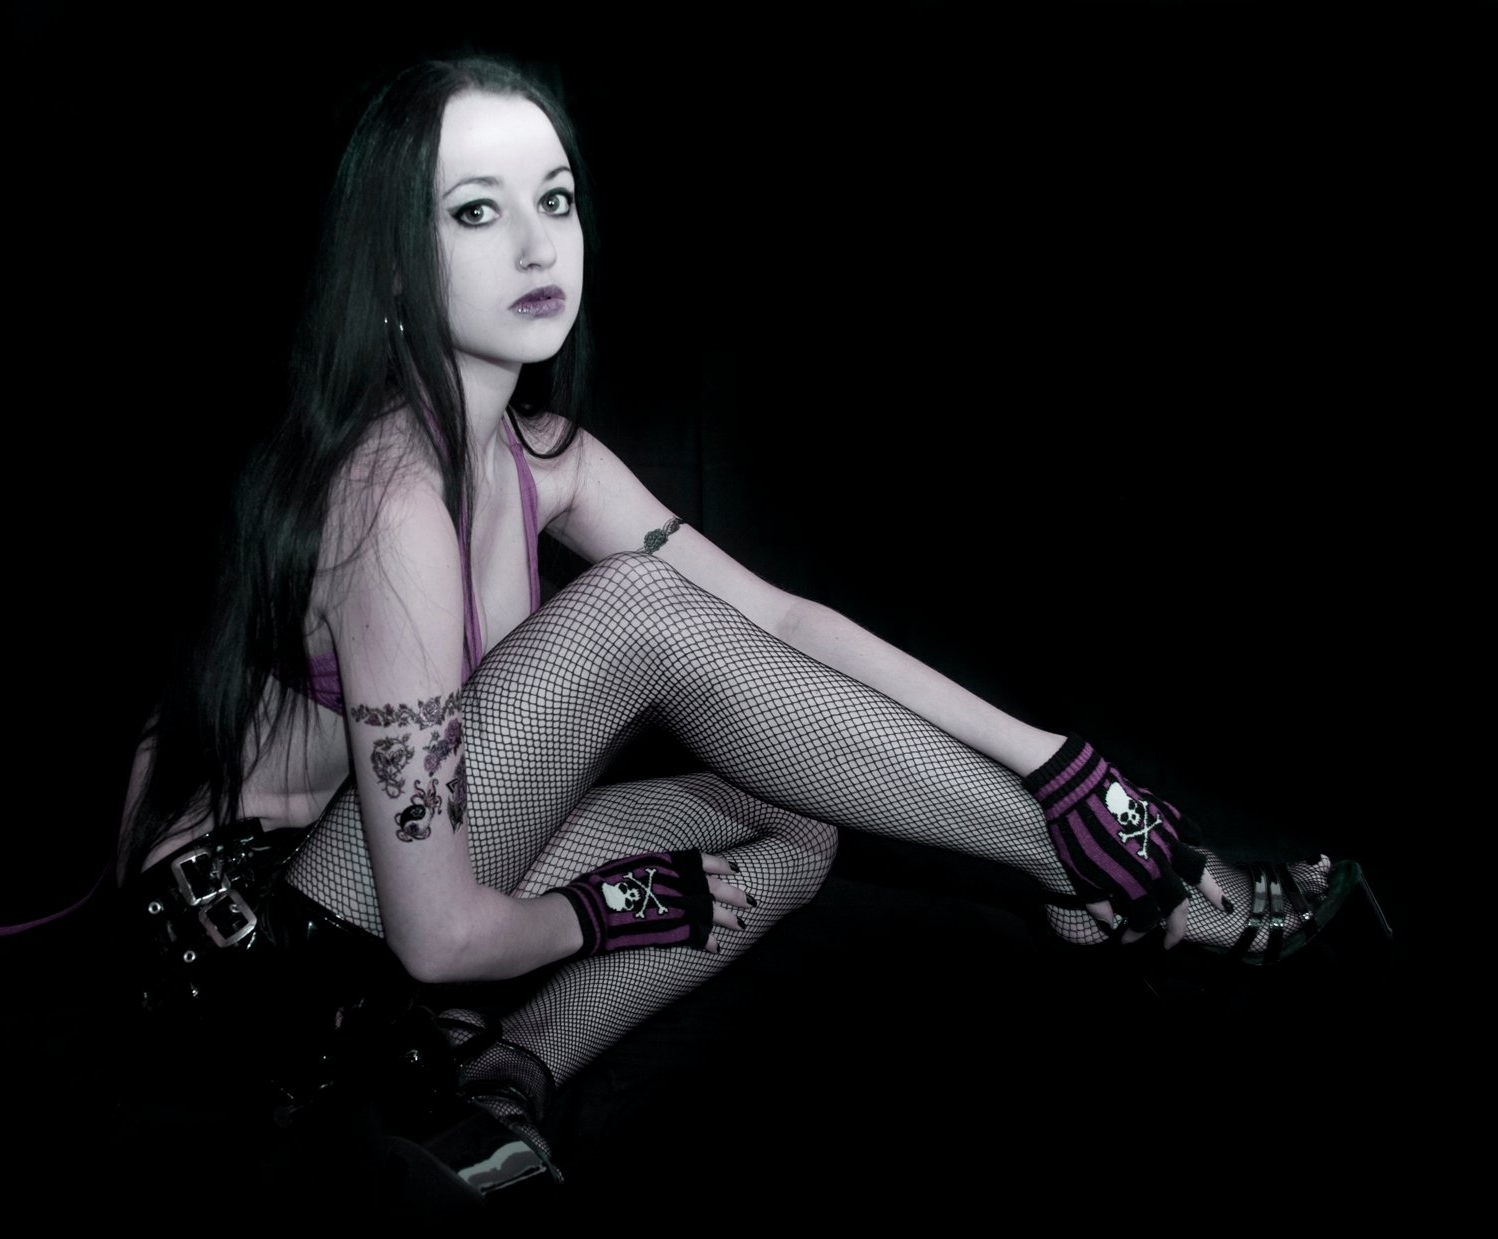 Click on picture to access to online webcam girls in gothic clothes.